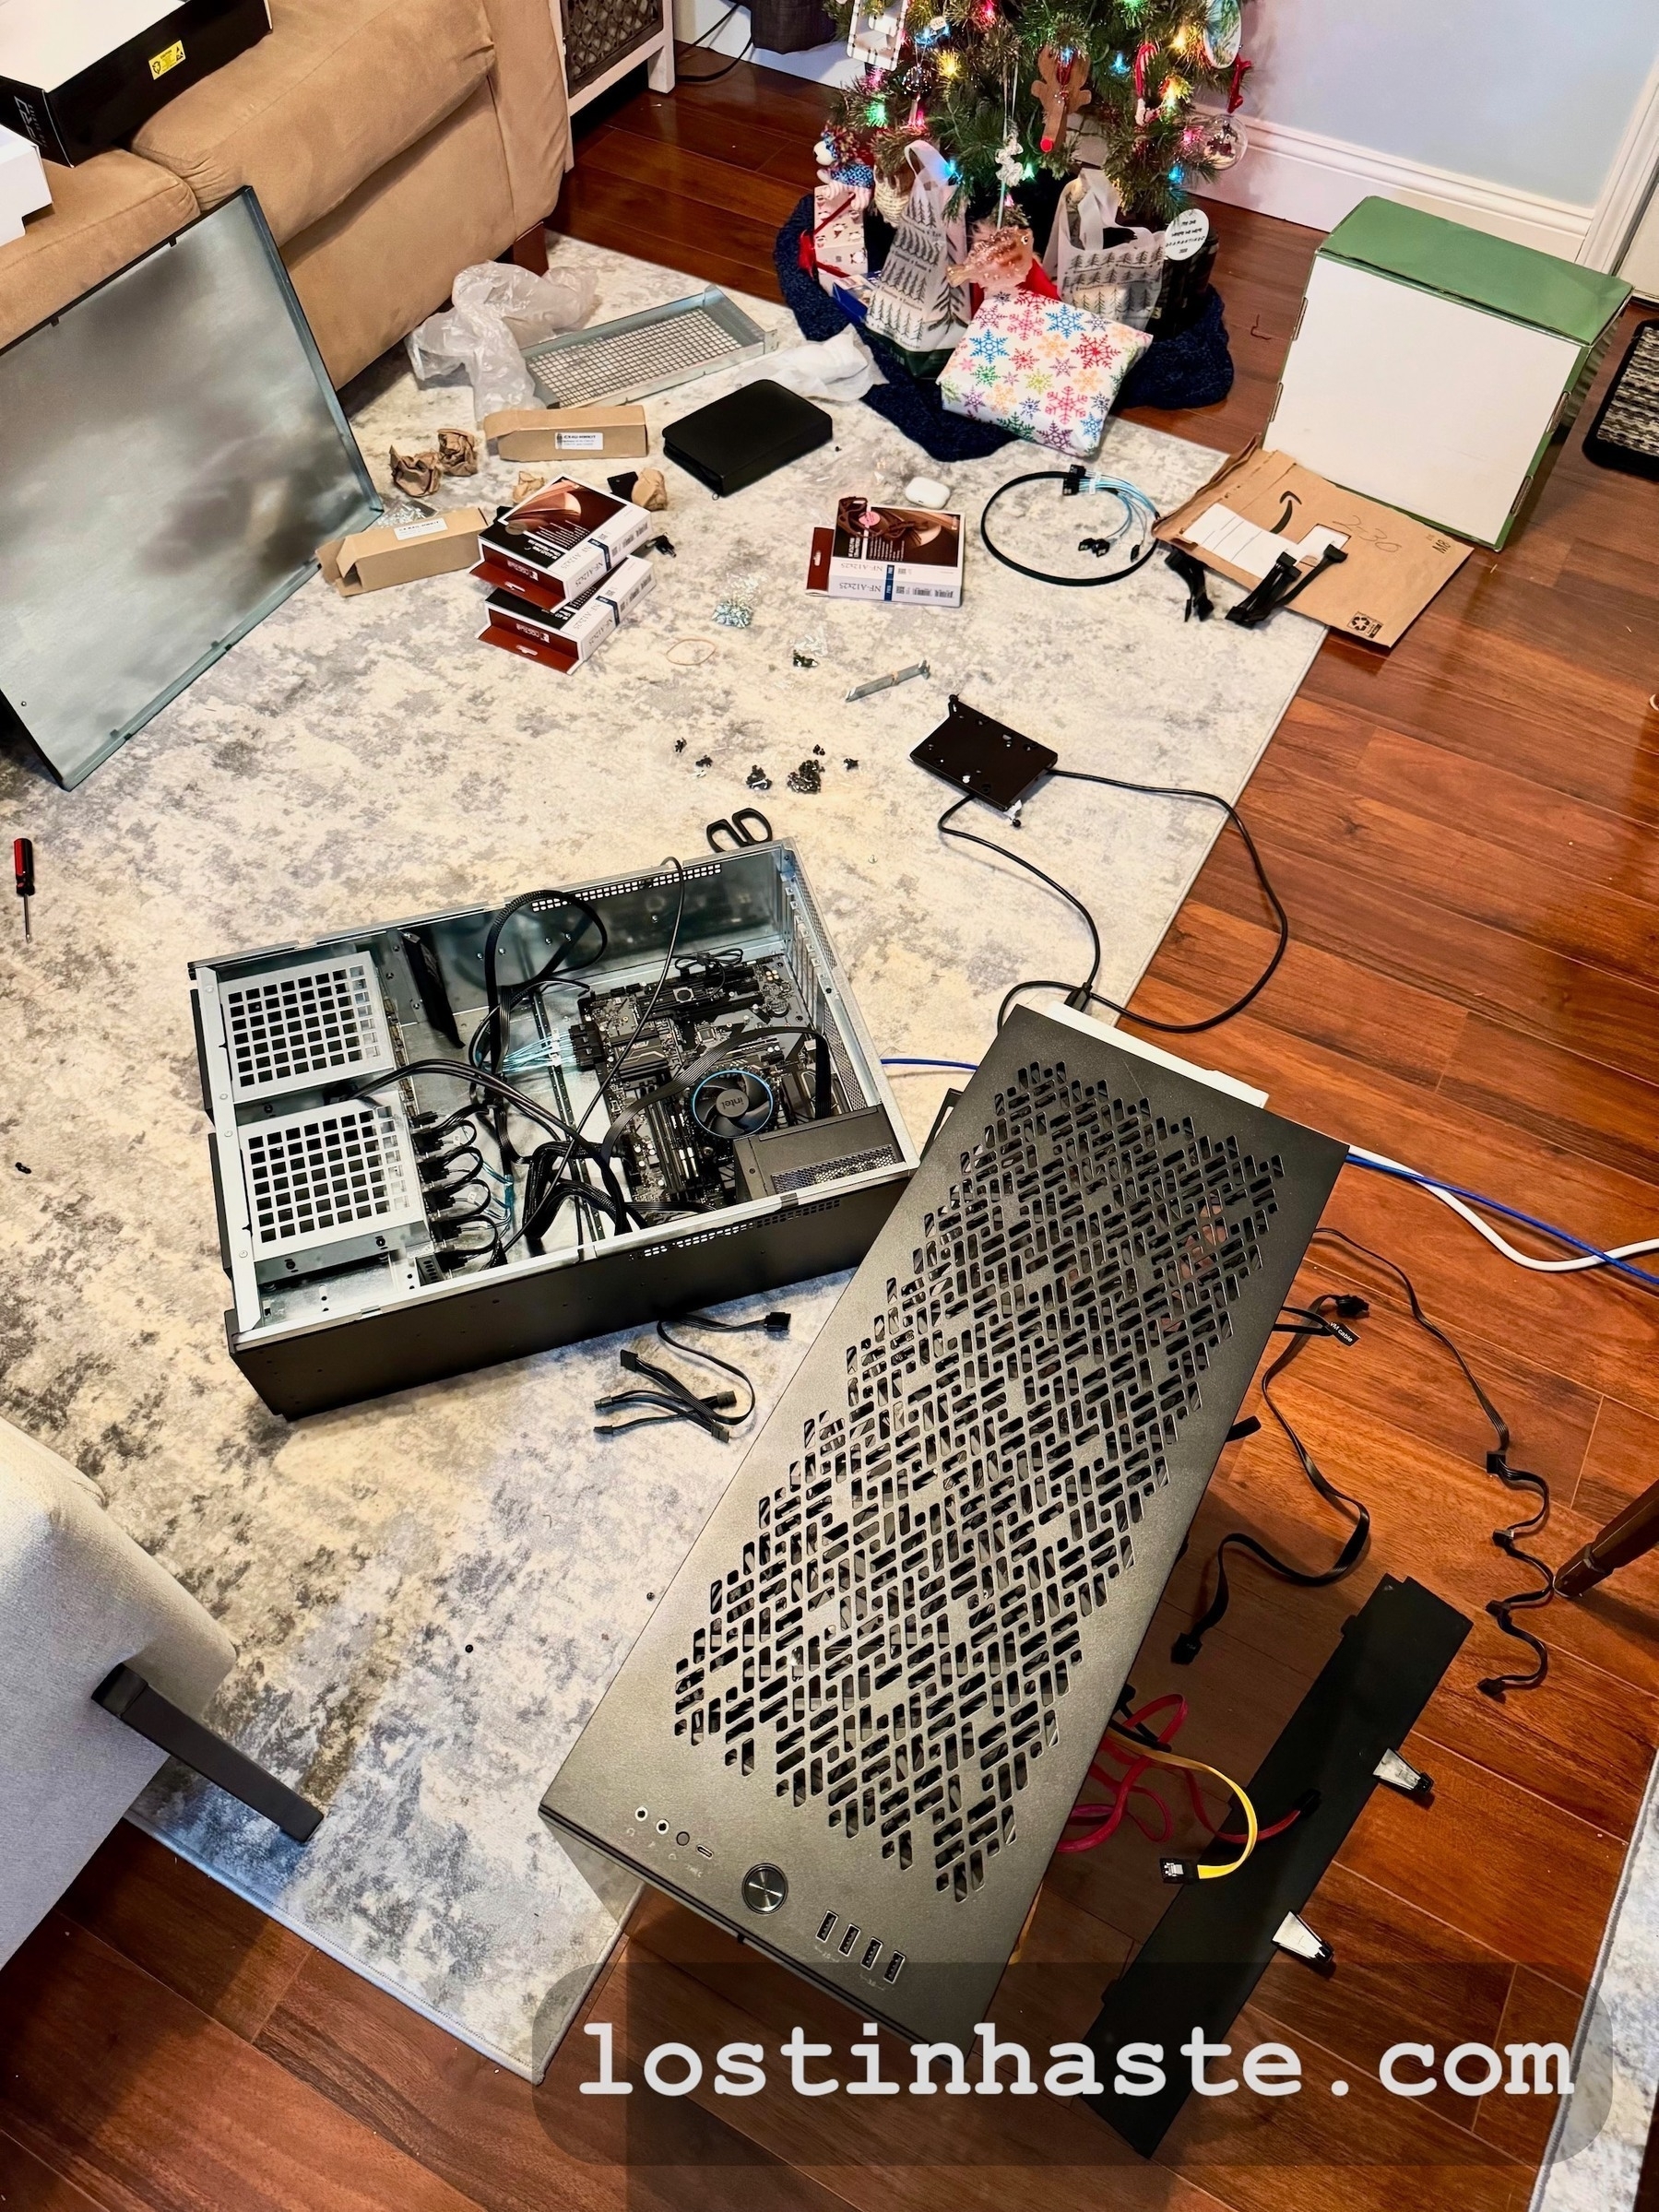 Photo of a tech mess: two computer cases (one horizontal on the floor with open wires exposed and the other vertical with wires poking out), parts on the floor, three computer fan boxes, screws everywhere...on top of a grey/white carpet (the carpet is on top of a hard-wood floor), with a Christmas tree in the background (presents under it), and a couch on the edge of the upper-right side of the photo.